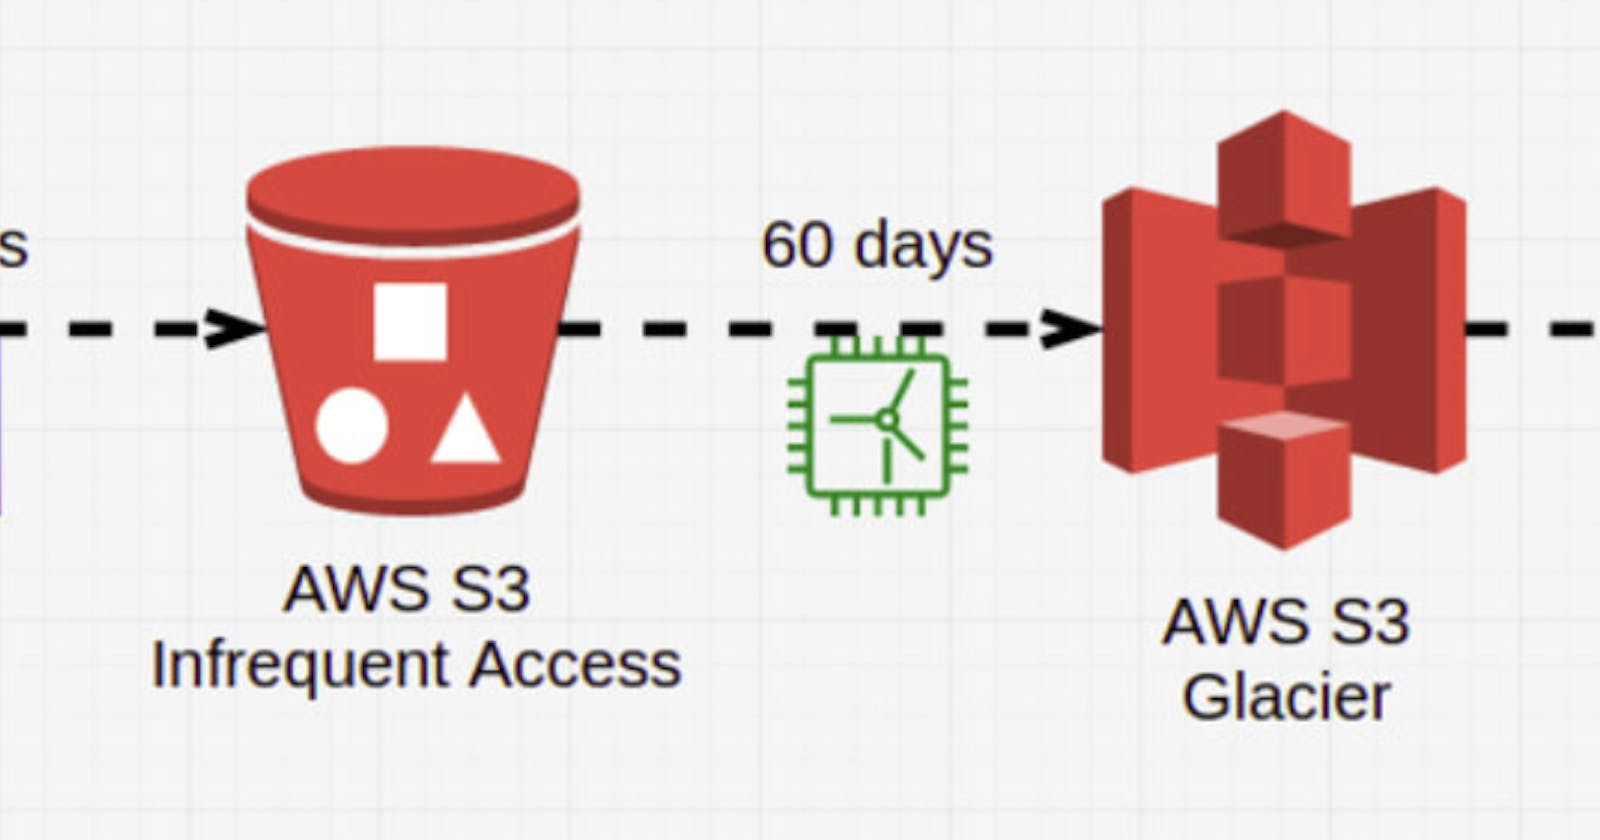 Exploring Amazon S3 Bucket Lifecycle Management Challenges: Incrementally Updating Rules with AWS Lambda